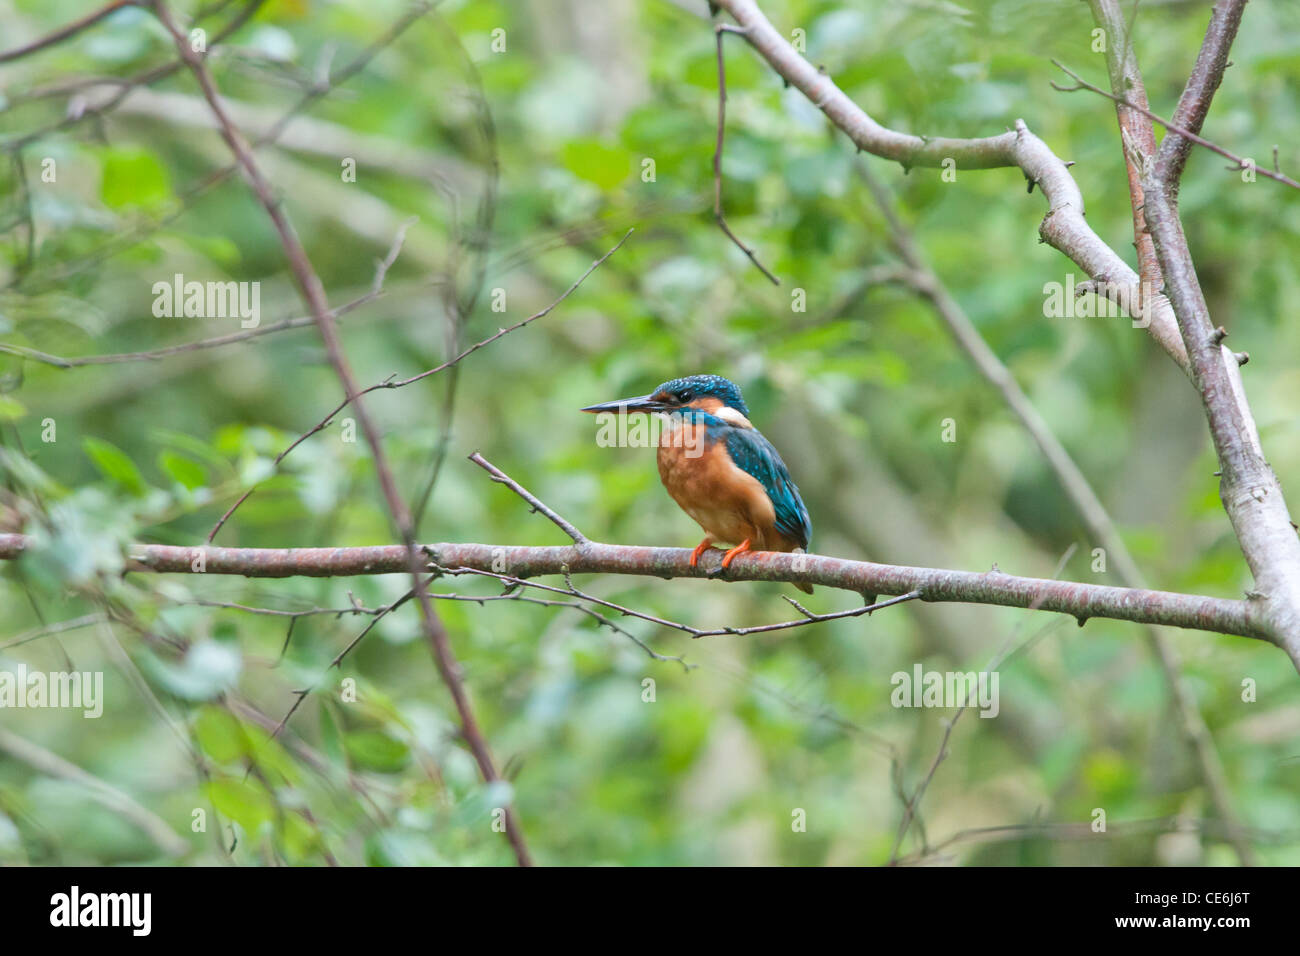 A Common Kingfisher (Alcedo atthis) sitting on a tree branch. Stock Photo